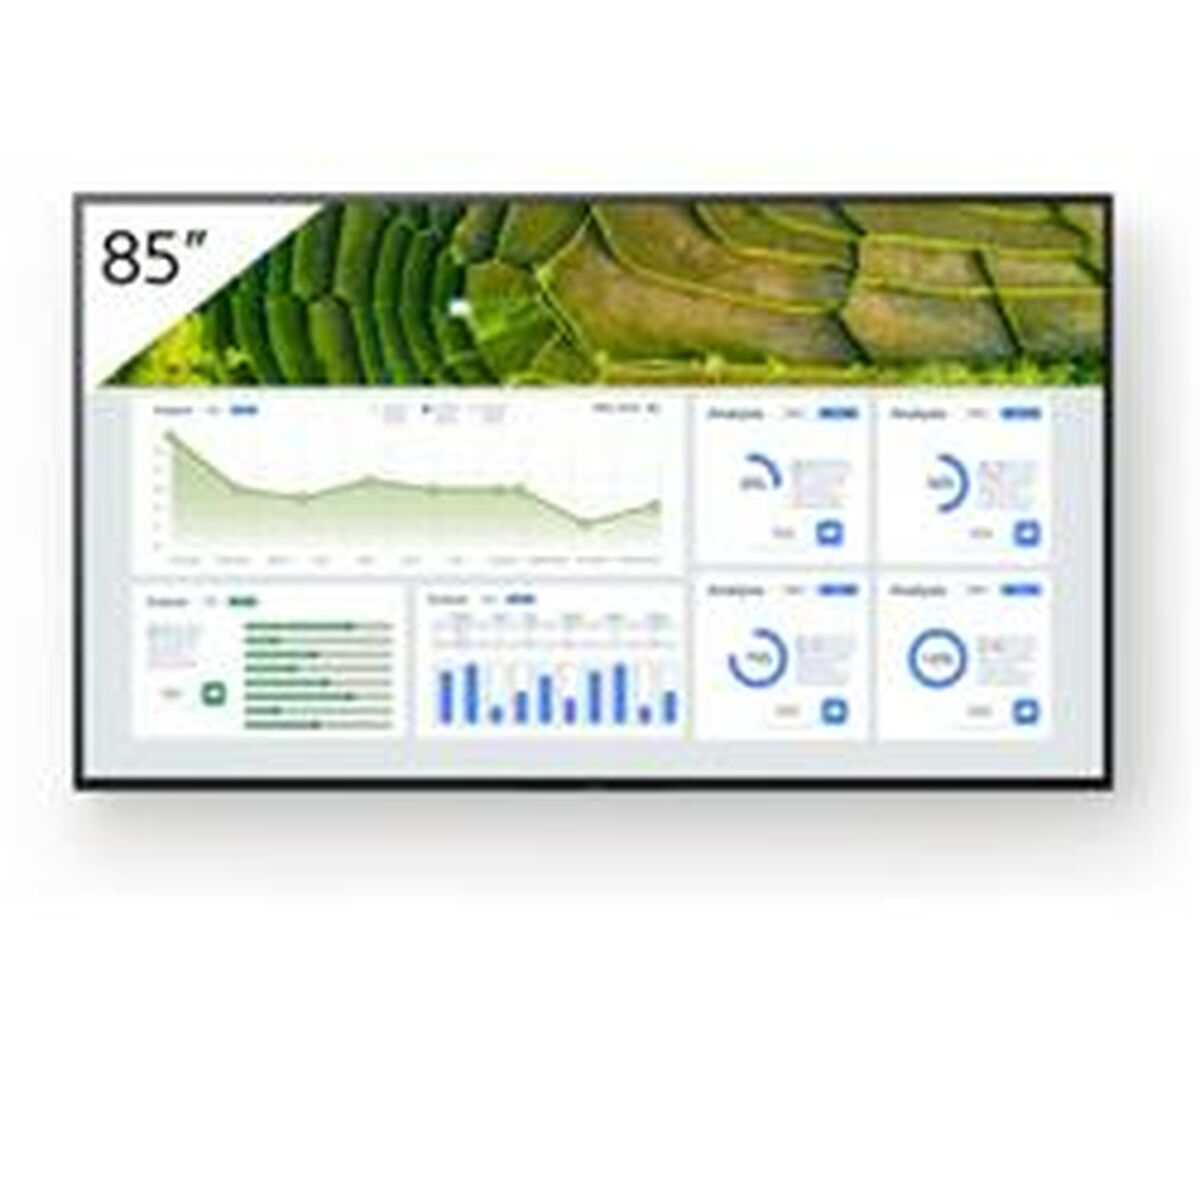 Monitor Videowall Sony PRO BRAVIA 85" 4K Ultra HD 60 Hz, Sony, Computing, monitor-videowall-sony-pro-bravia-85-4k-ultra-hd-60-hz-1, :Ultra HD, Brand_Sony, category-reference-2609, category-reference-2642, category-reference-2644, category-reference-t-19685, category-reference-t-19902, computers / peripherals, Condition_NEW, office, Price_+ 1000, Teleworking, RiotNook